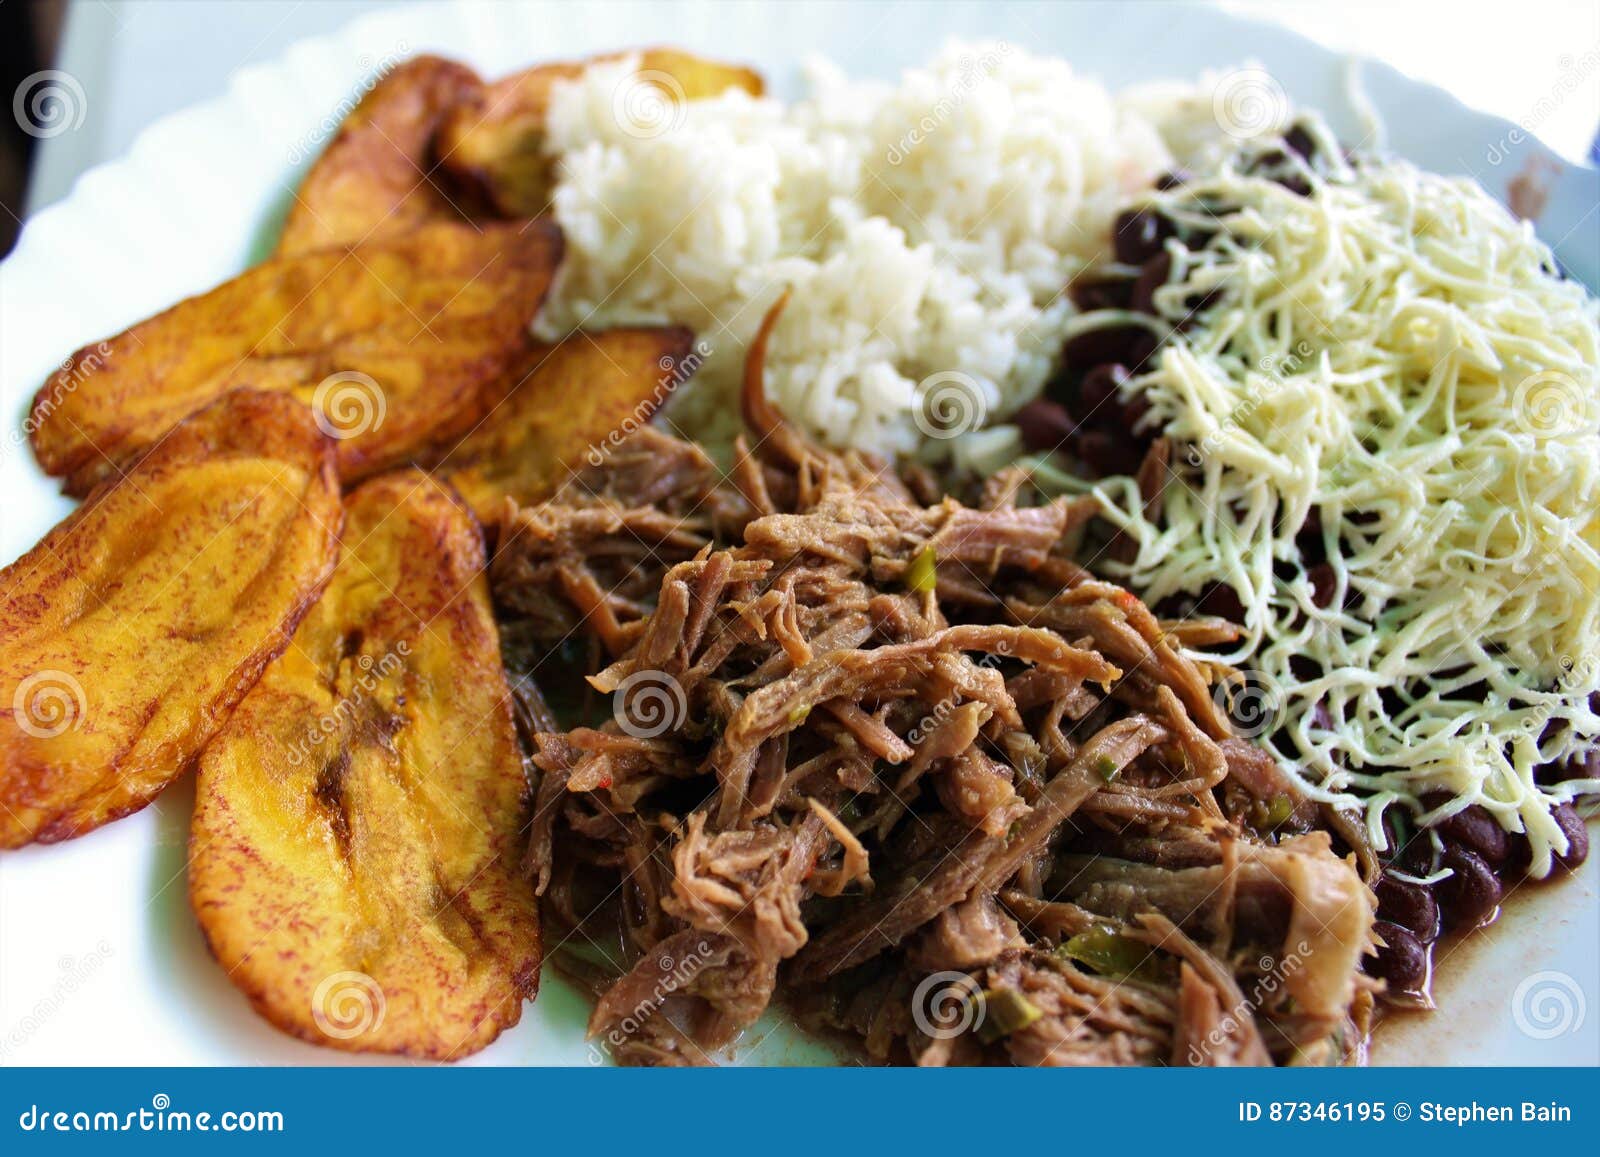 venezuelan typical dish called pabellon, made up of shredded meat, black beans, rice, fried plantain slices, and salty cheese.